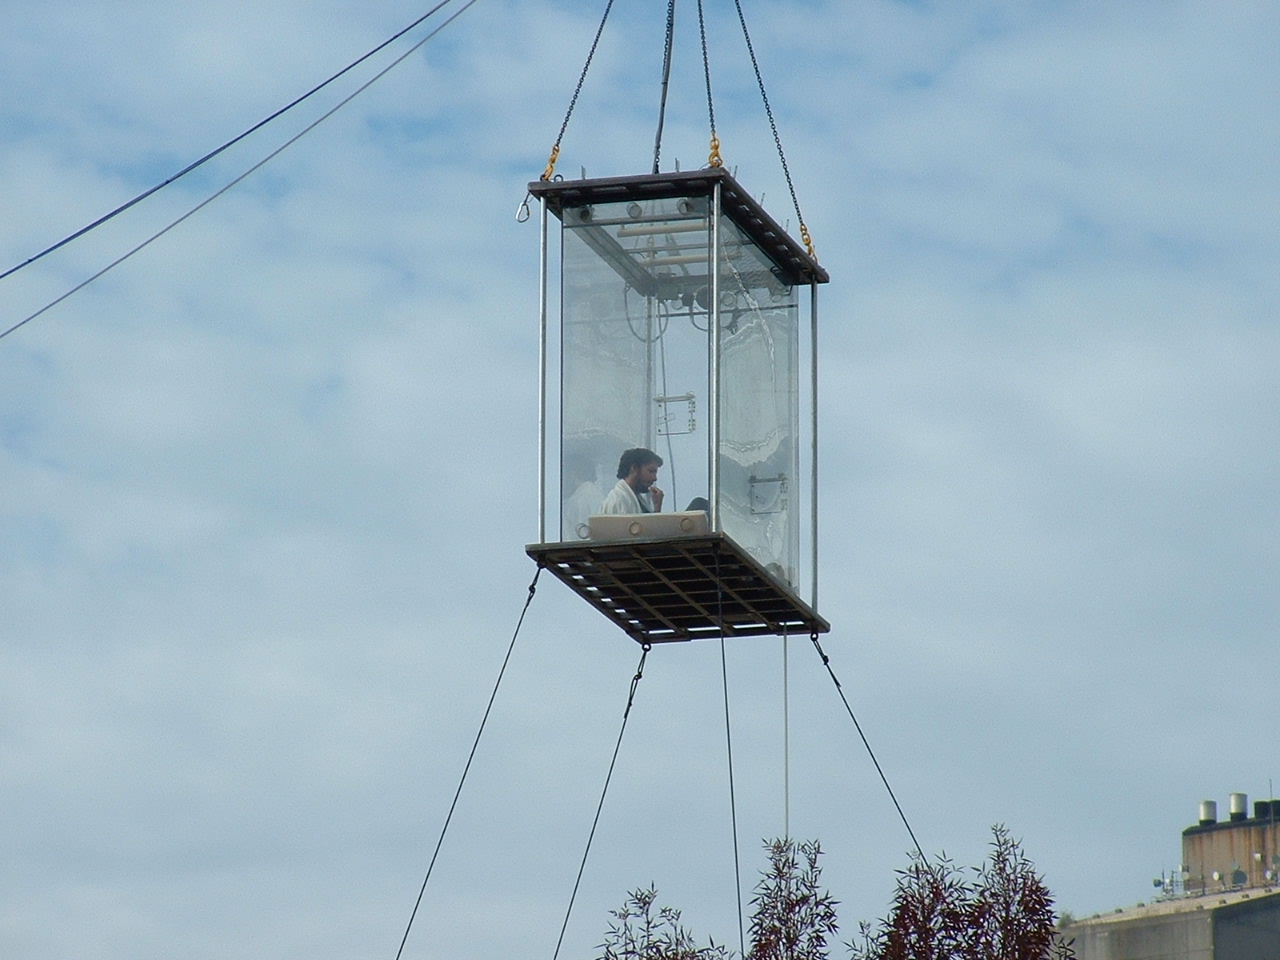 Colour photograph showing a man sitting inside a clear box suspended in the air.